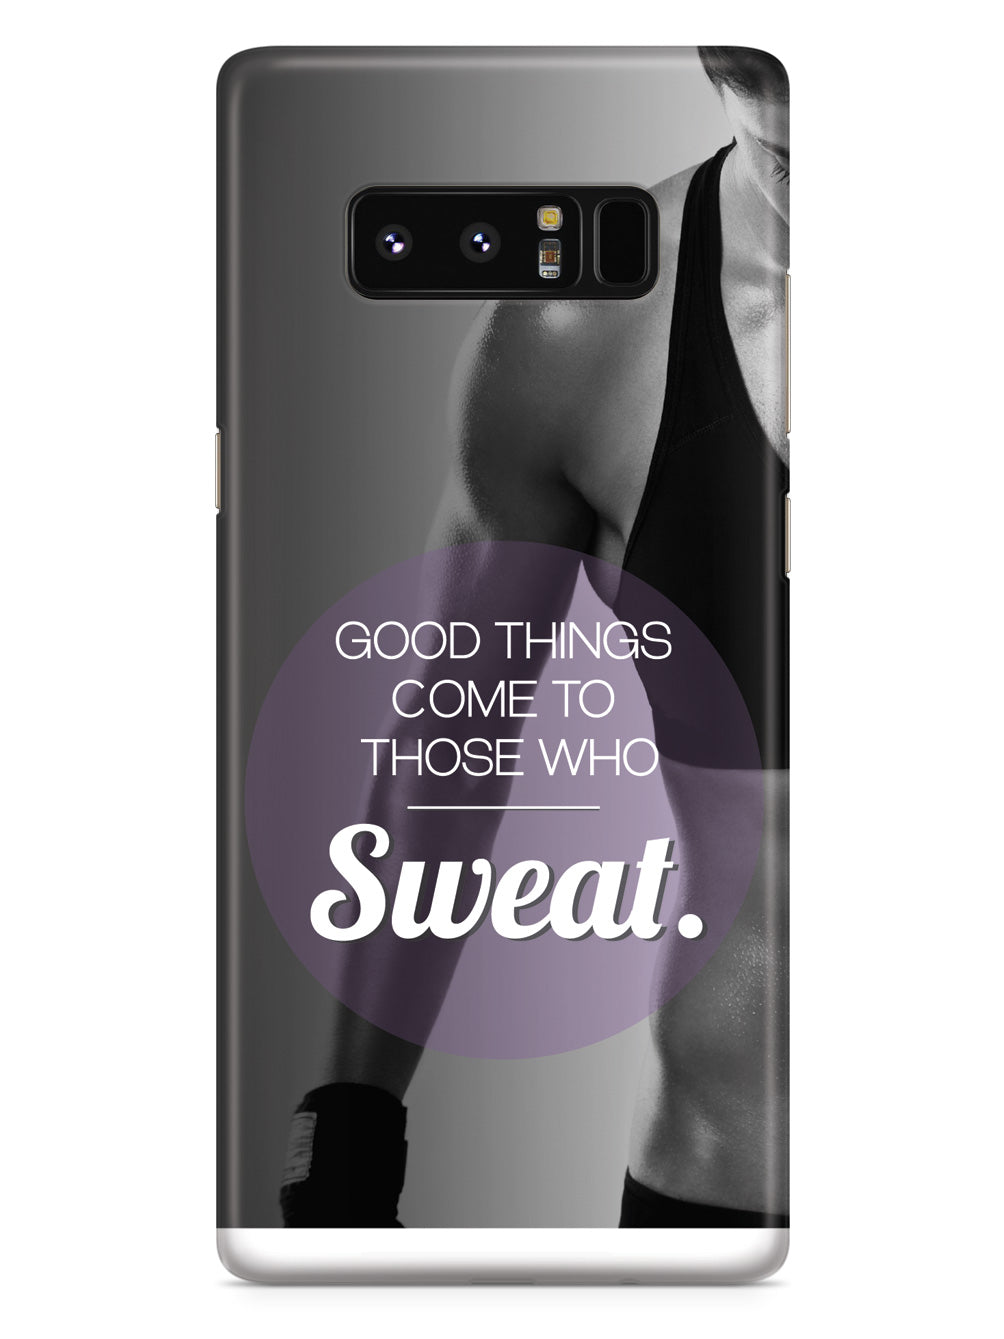 Those Who Sweat - Fitness Case